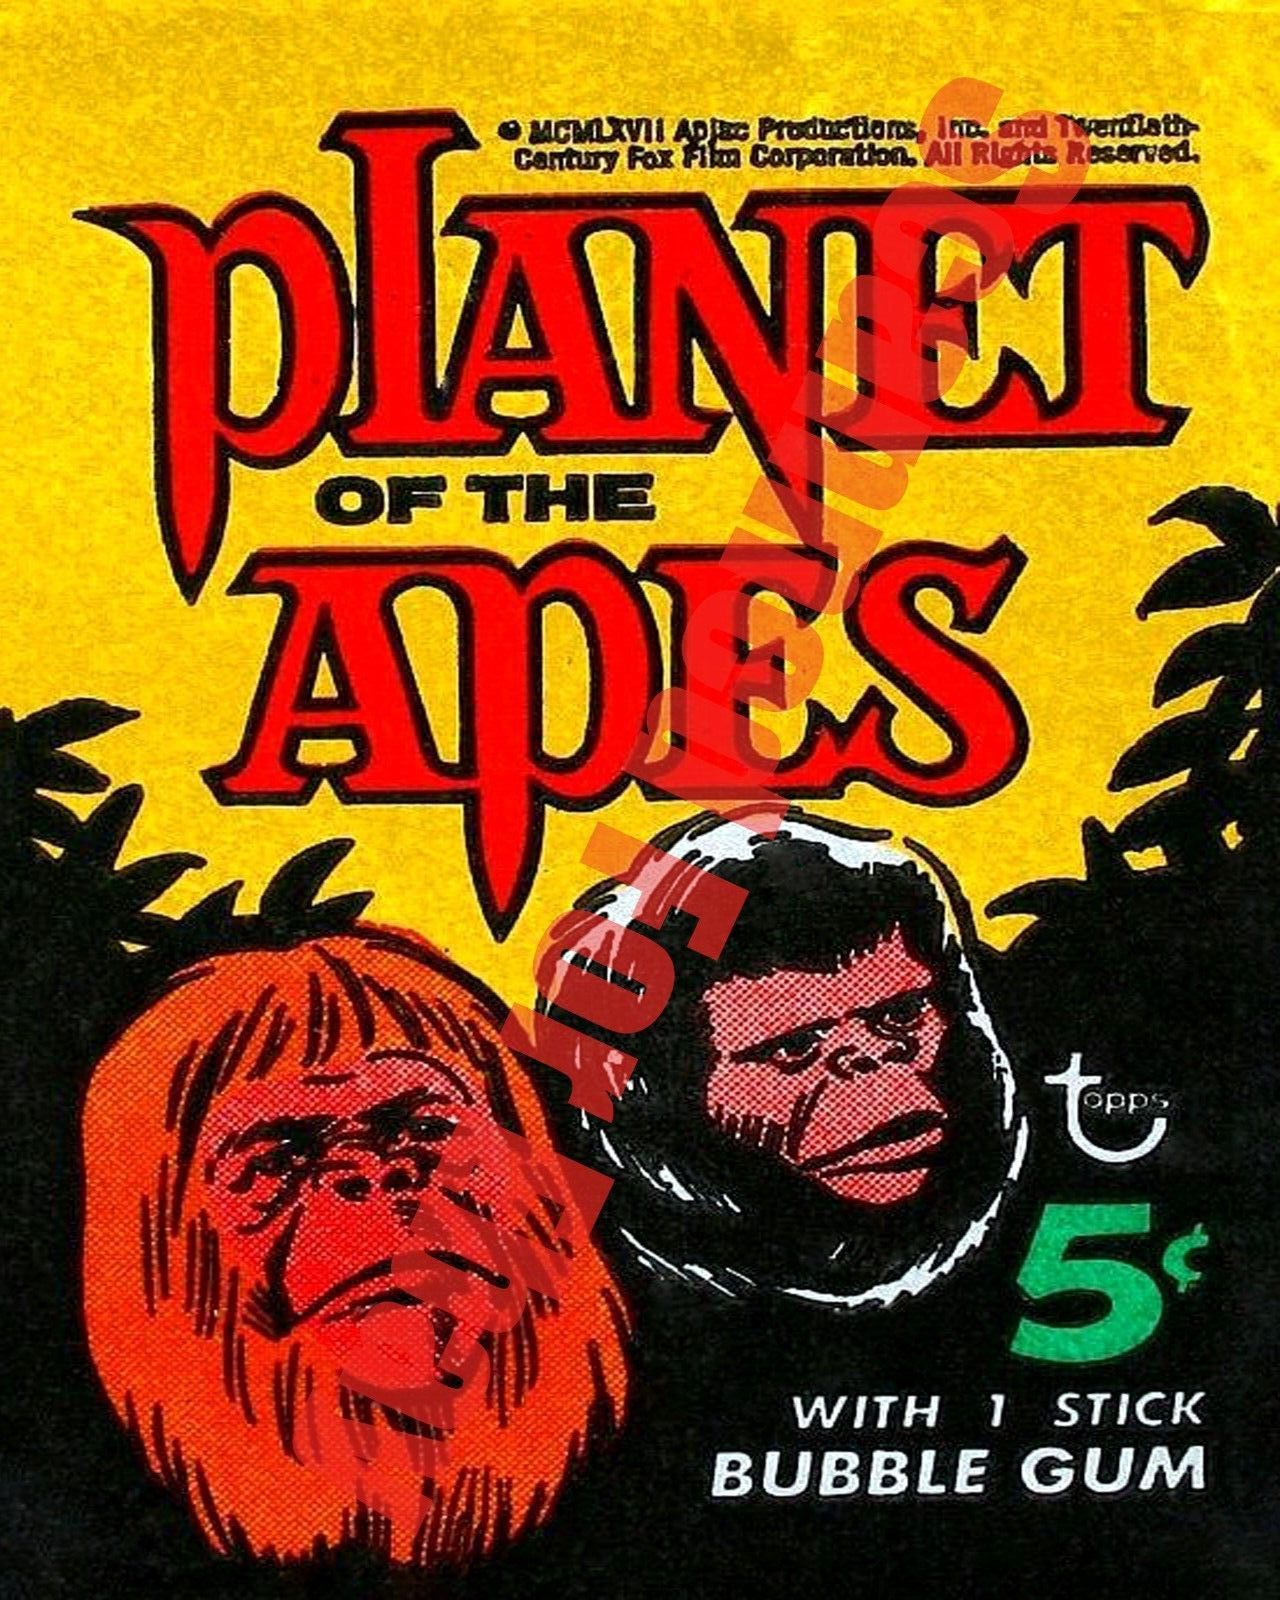 1968 TOPPS Planet Apes Movie Card Wax Pack Bubble Gum Wrapper 8x10 Photo